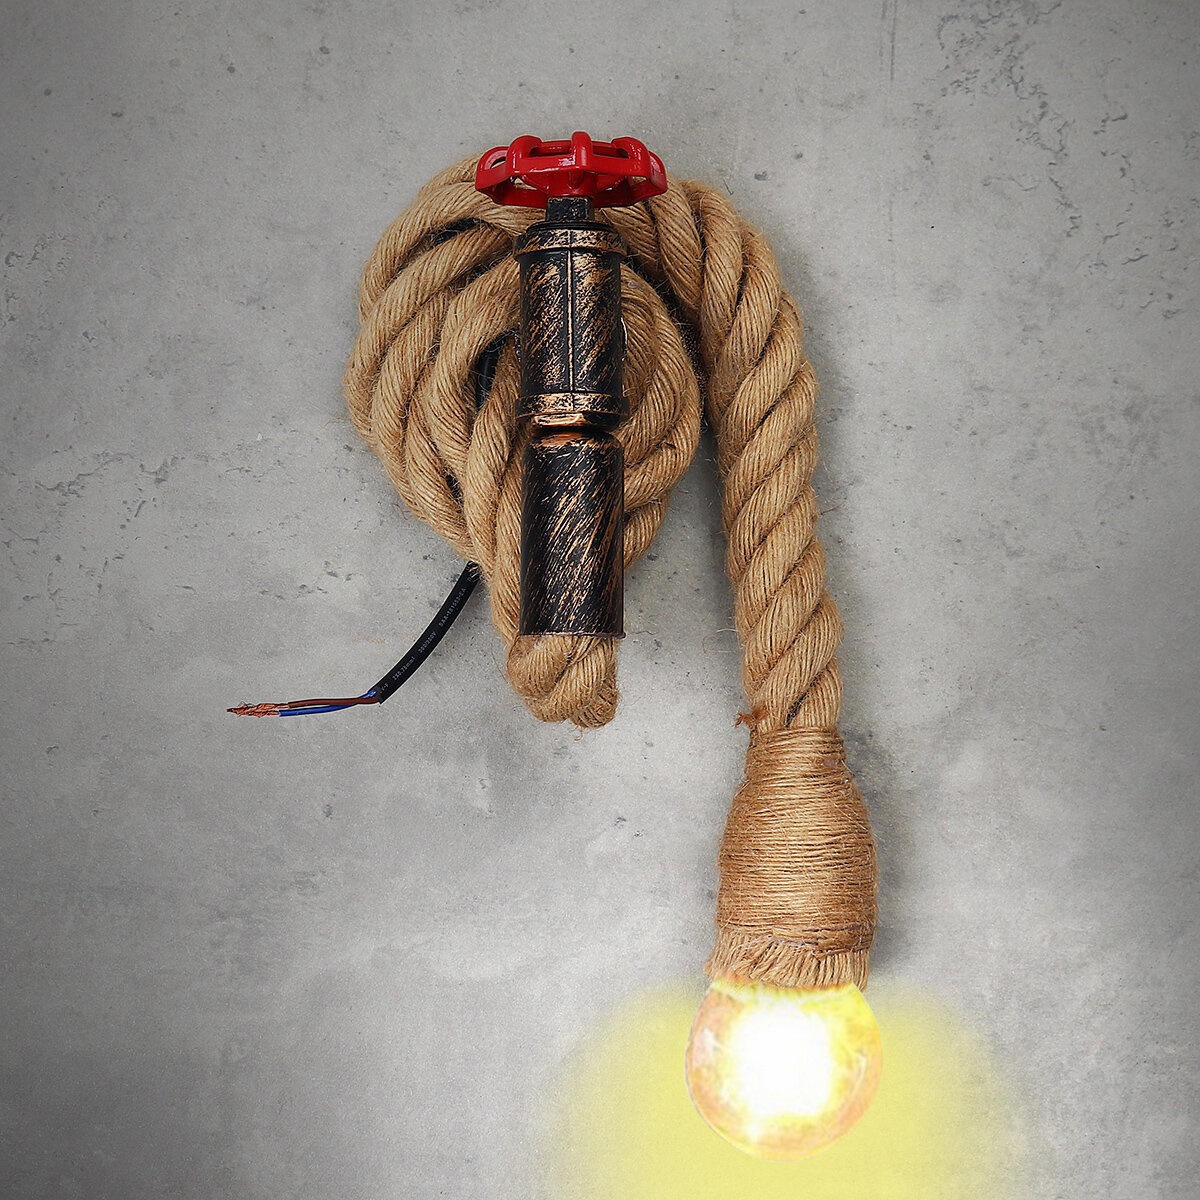 E27 Vintage Industrial Hemp Rope Pipe Wall Light Lamp Sconce Fixture Room Decor